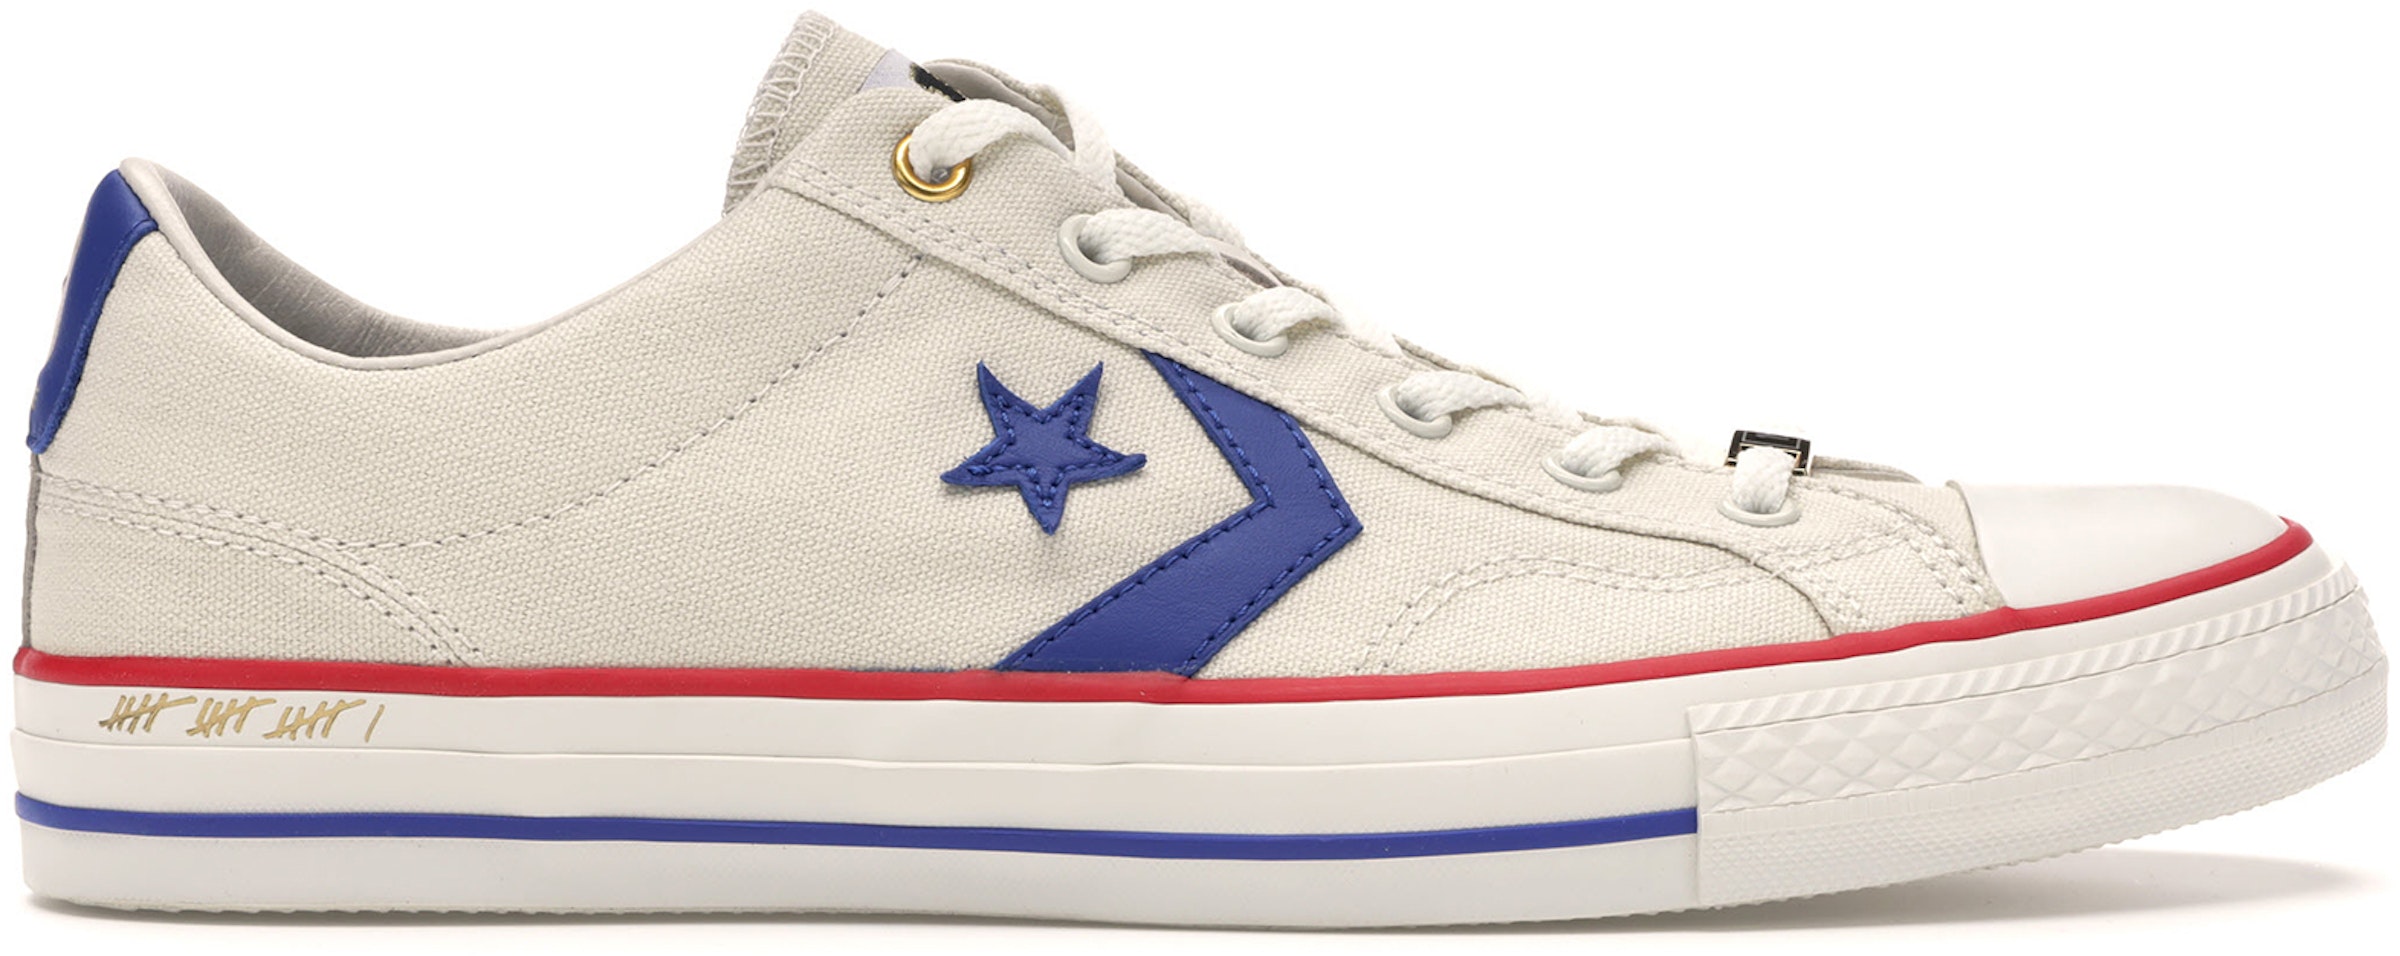 Converse Star Player Ox Think (Intangibles) - 161409C